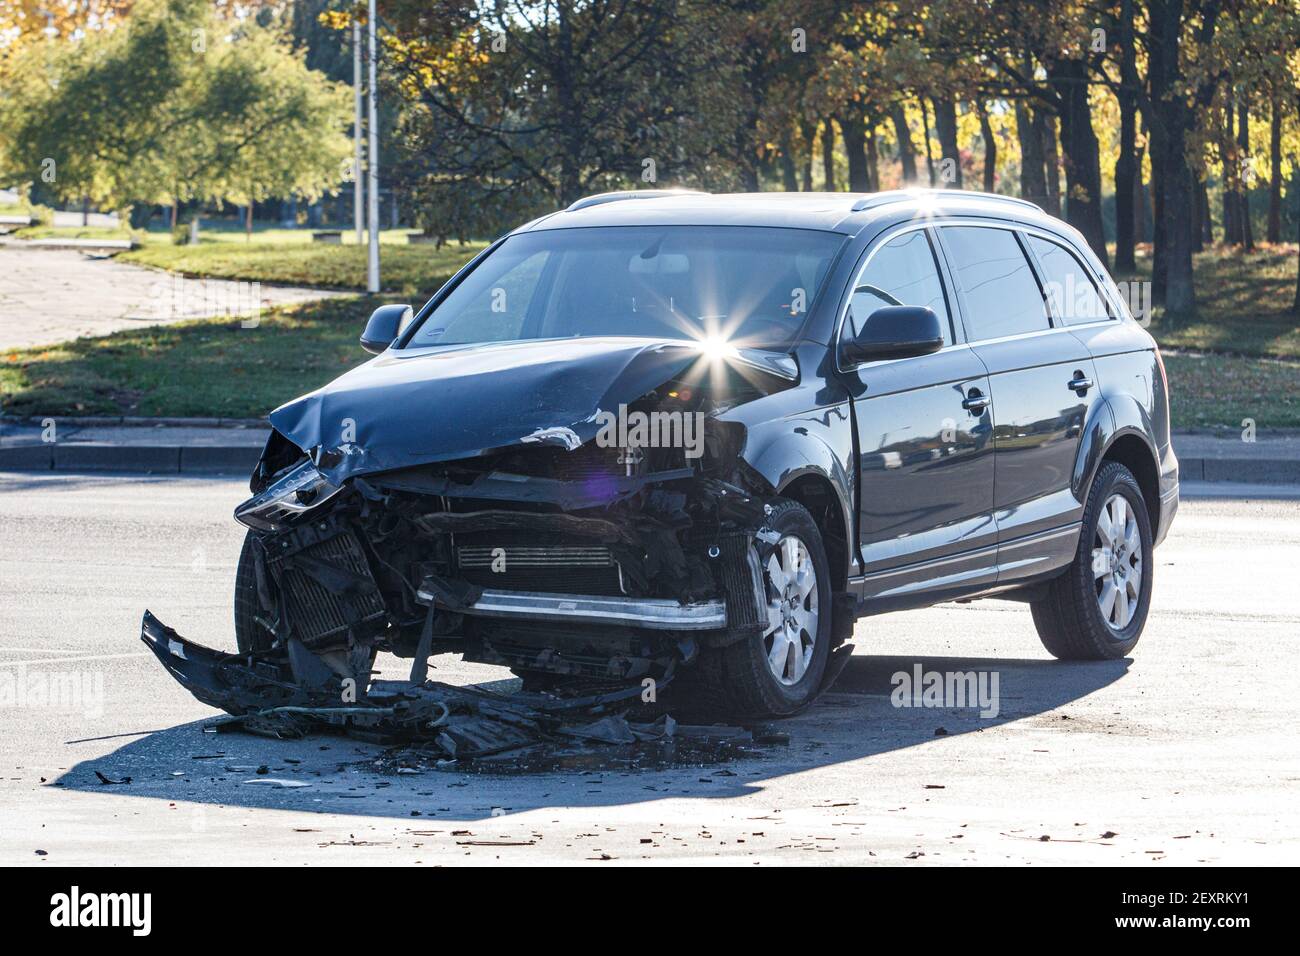 Car accident in the street. Smashed auto after car collision Stock Photo